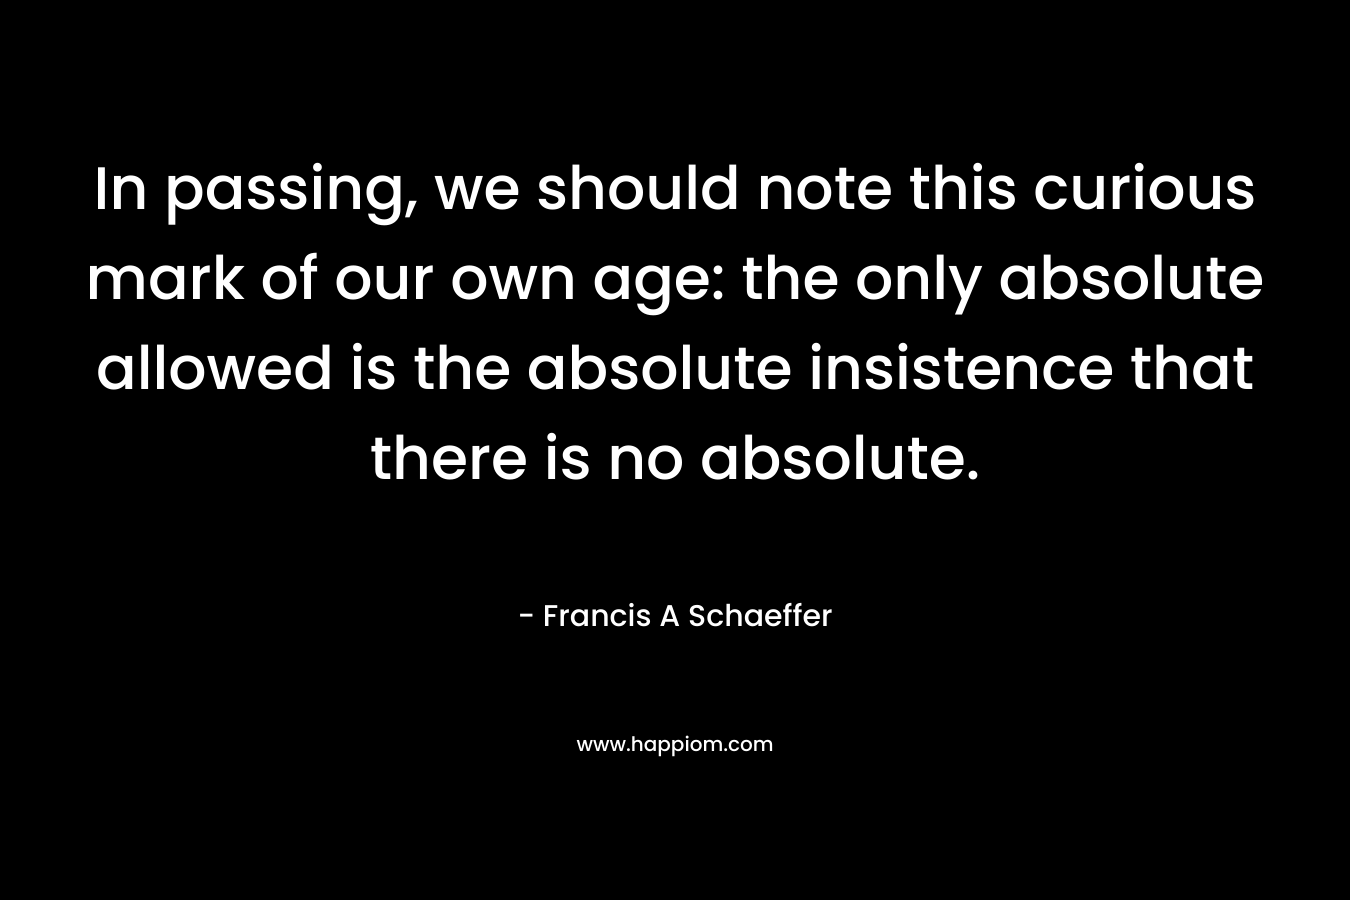 In passing, we should note this curious mark of our own age: the only absolute allowed is the absolute insistence that there is no absolute. – Francis A Schaeffer